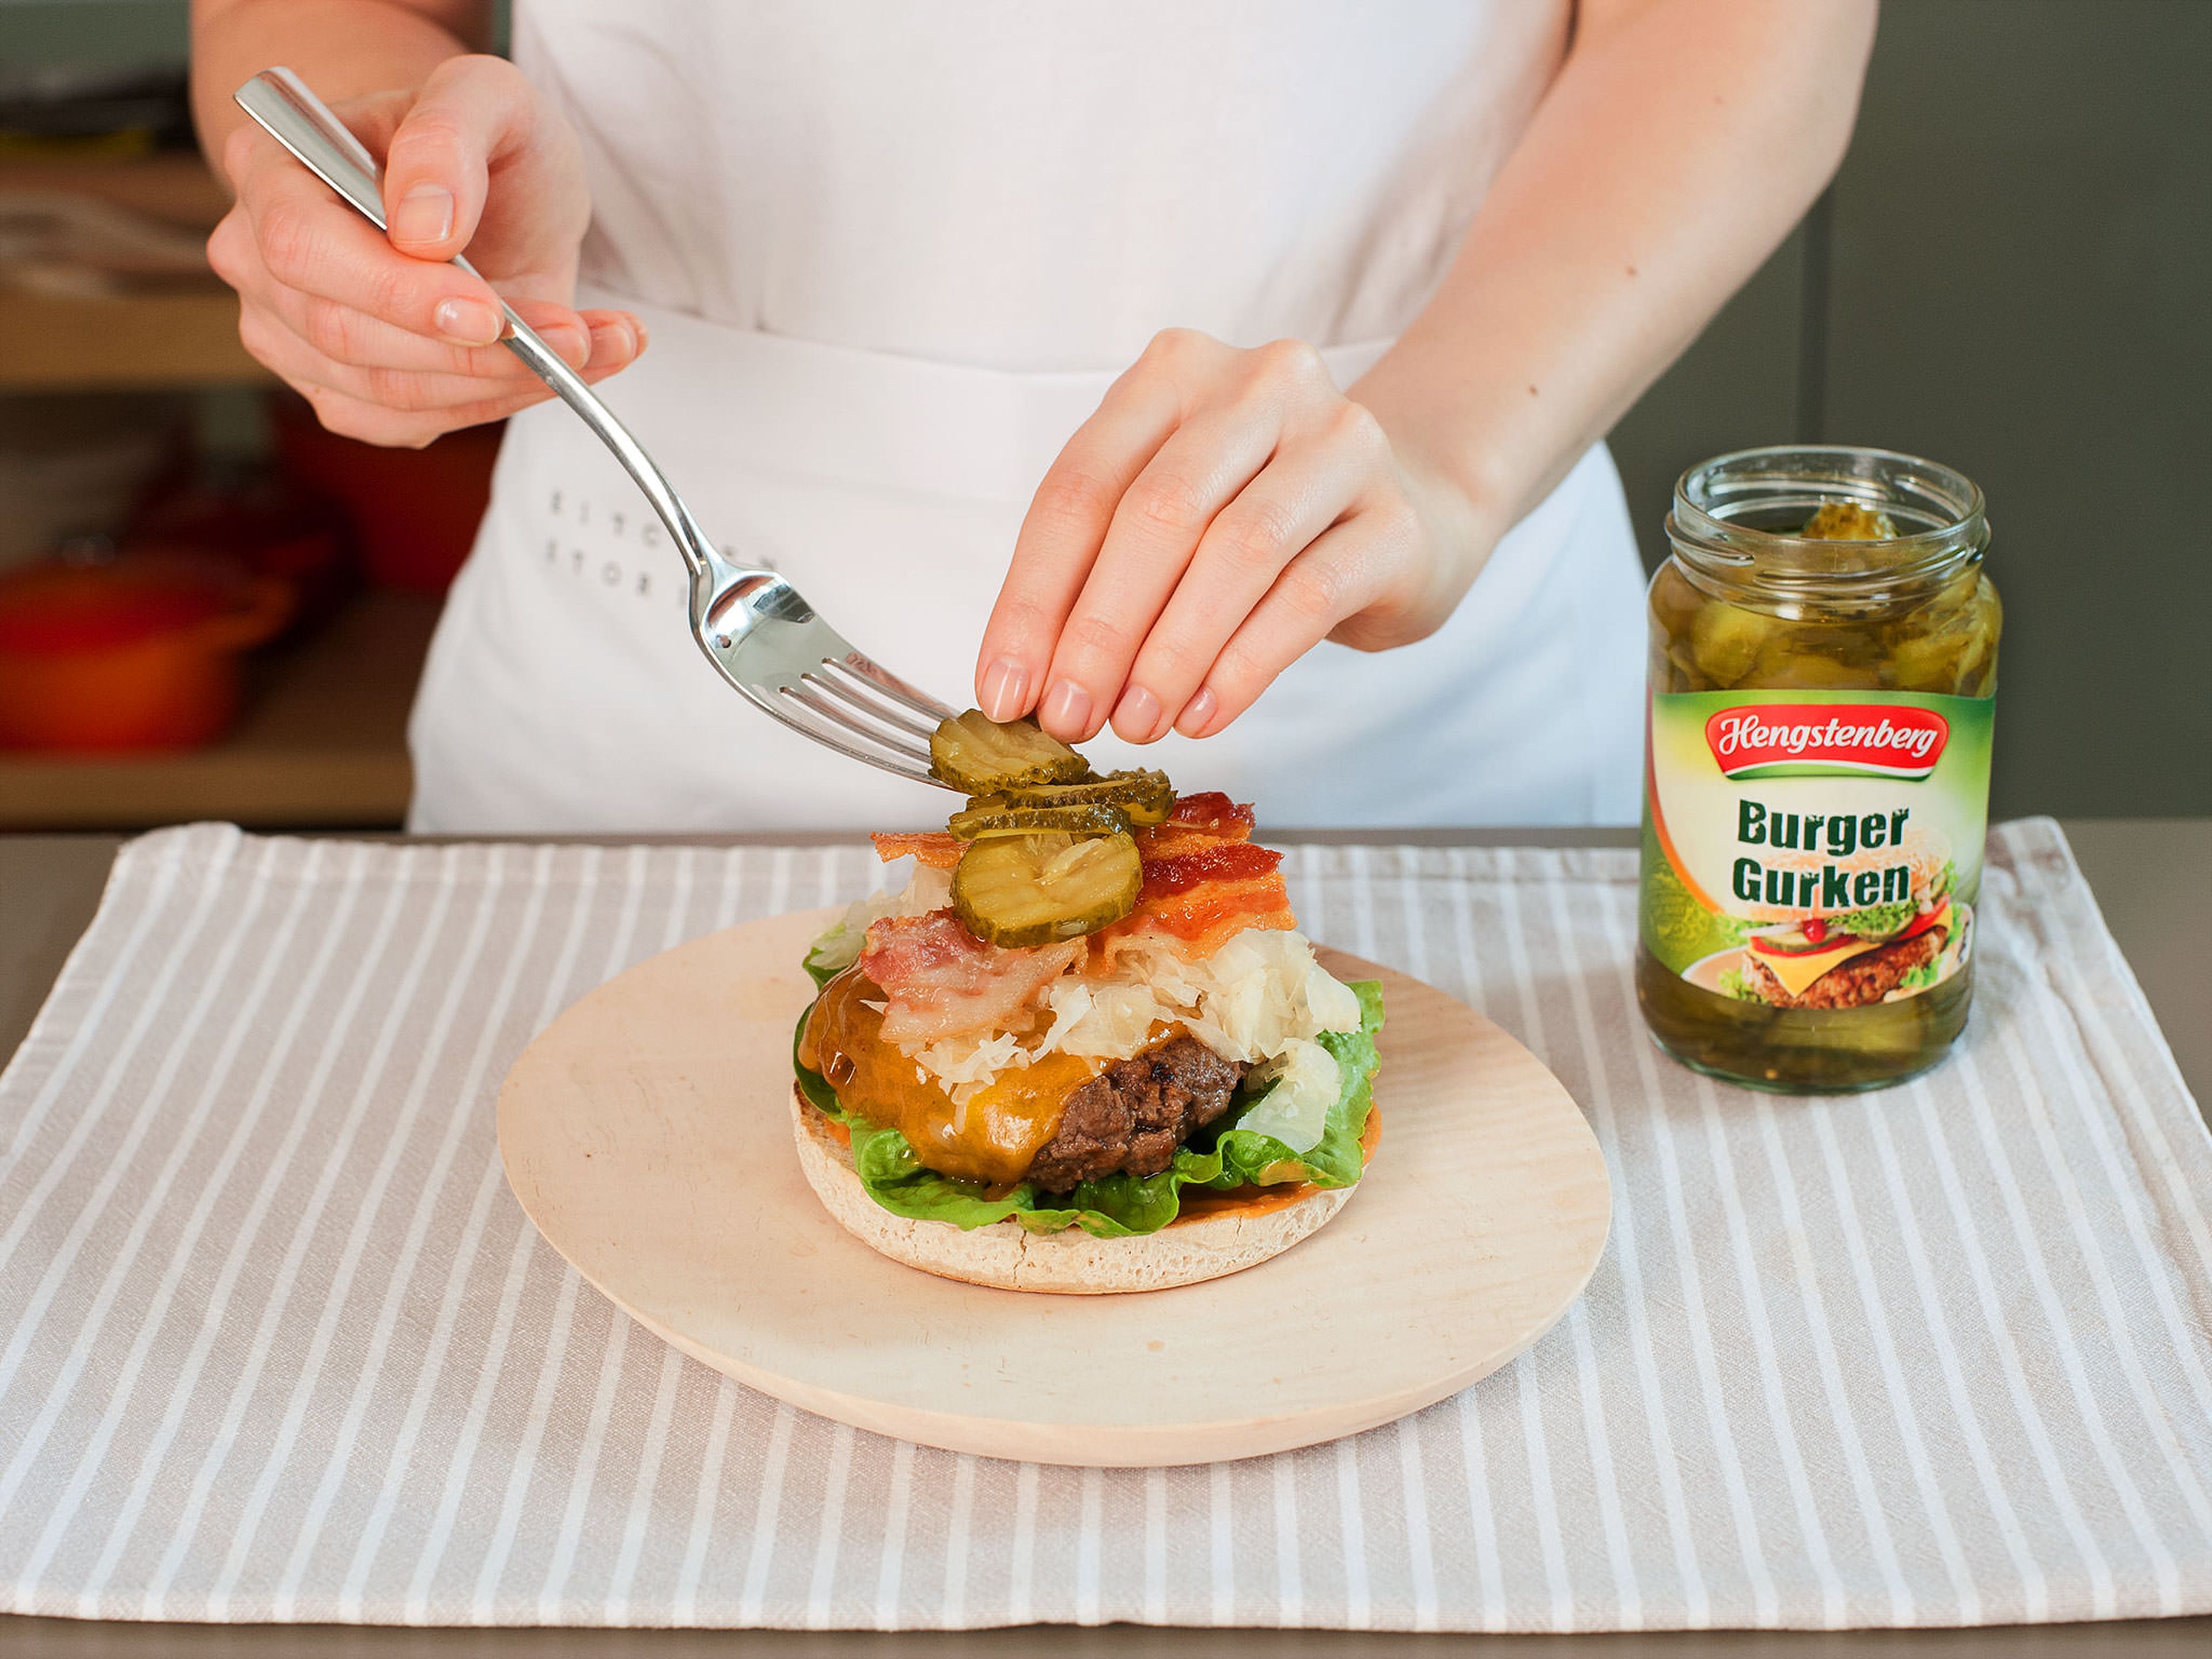 In the meantime, wash and dry lettuce. Heat a large, clean frying pan over medium heat, then add very little vegetable oil and toast burger buns for approx. 60 – 90 sec. per side. Mix together ketchup and mustard; spread an even layer over bottom burger bun. Assemble burger by layering lettuce, burger patty, sauerkraut, bacon, and pickles on top. Finish with some more sauce and top half of burger bun. Enjoy!